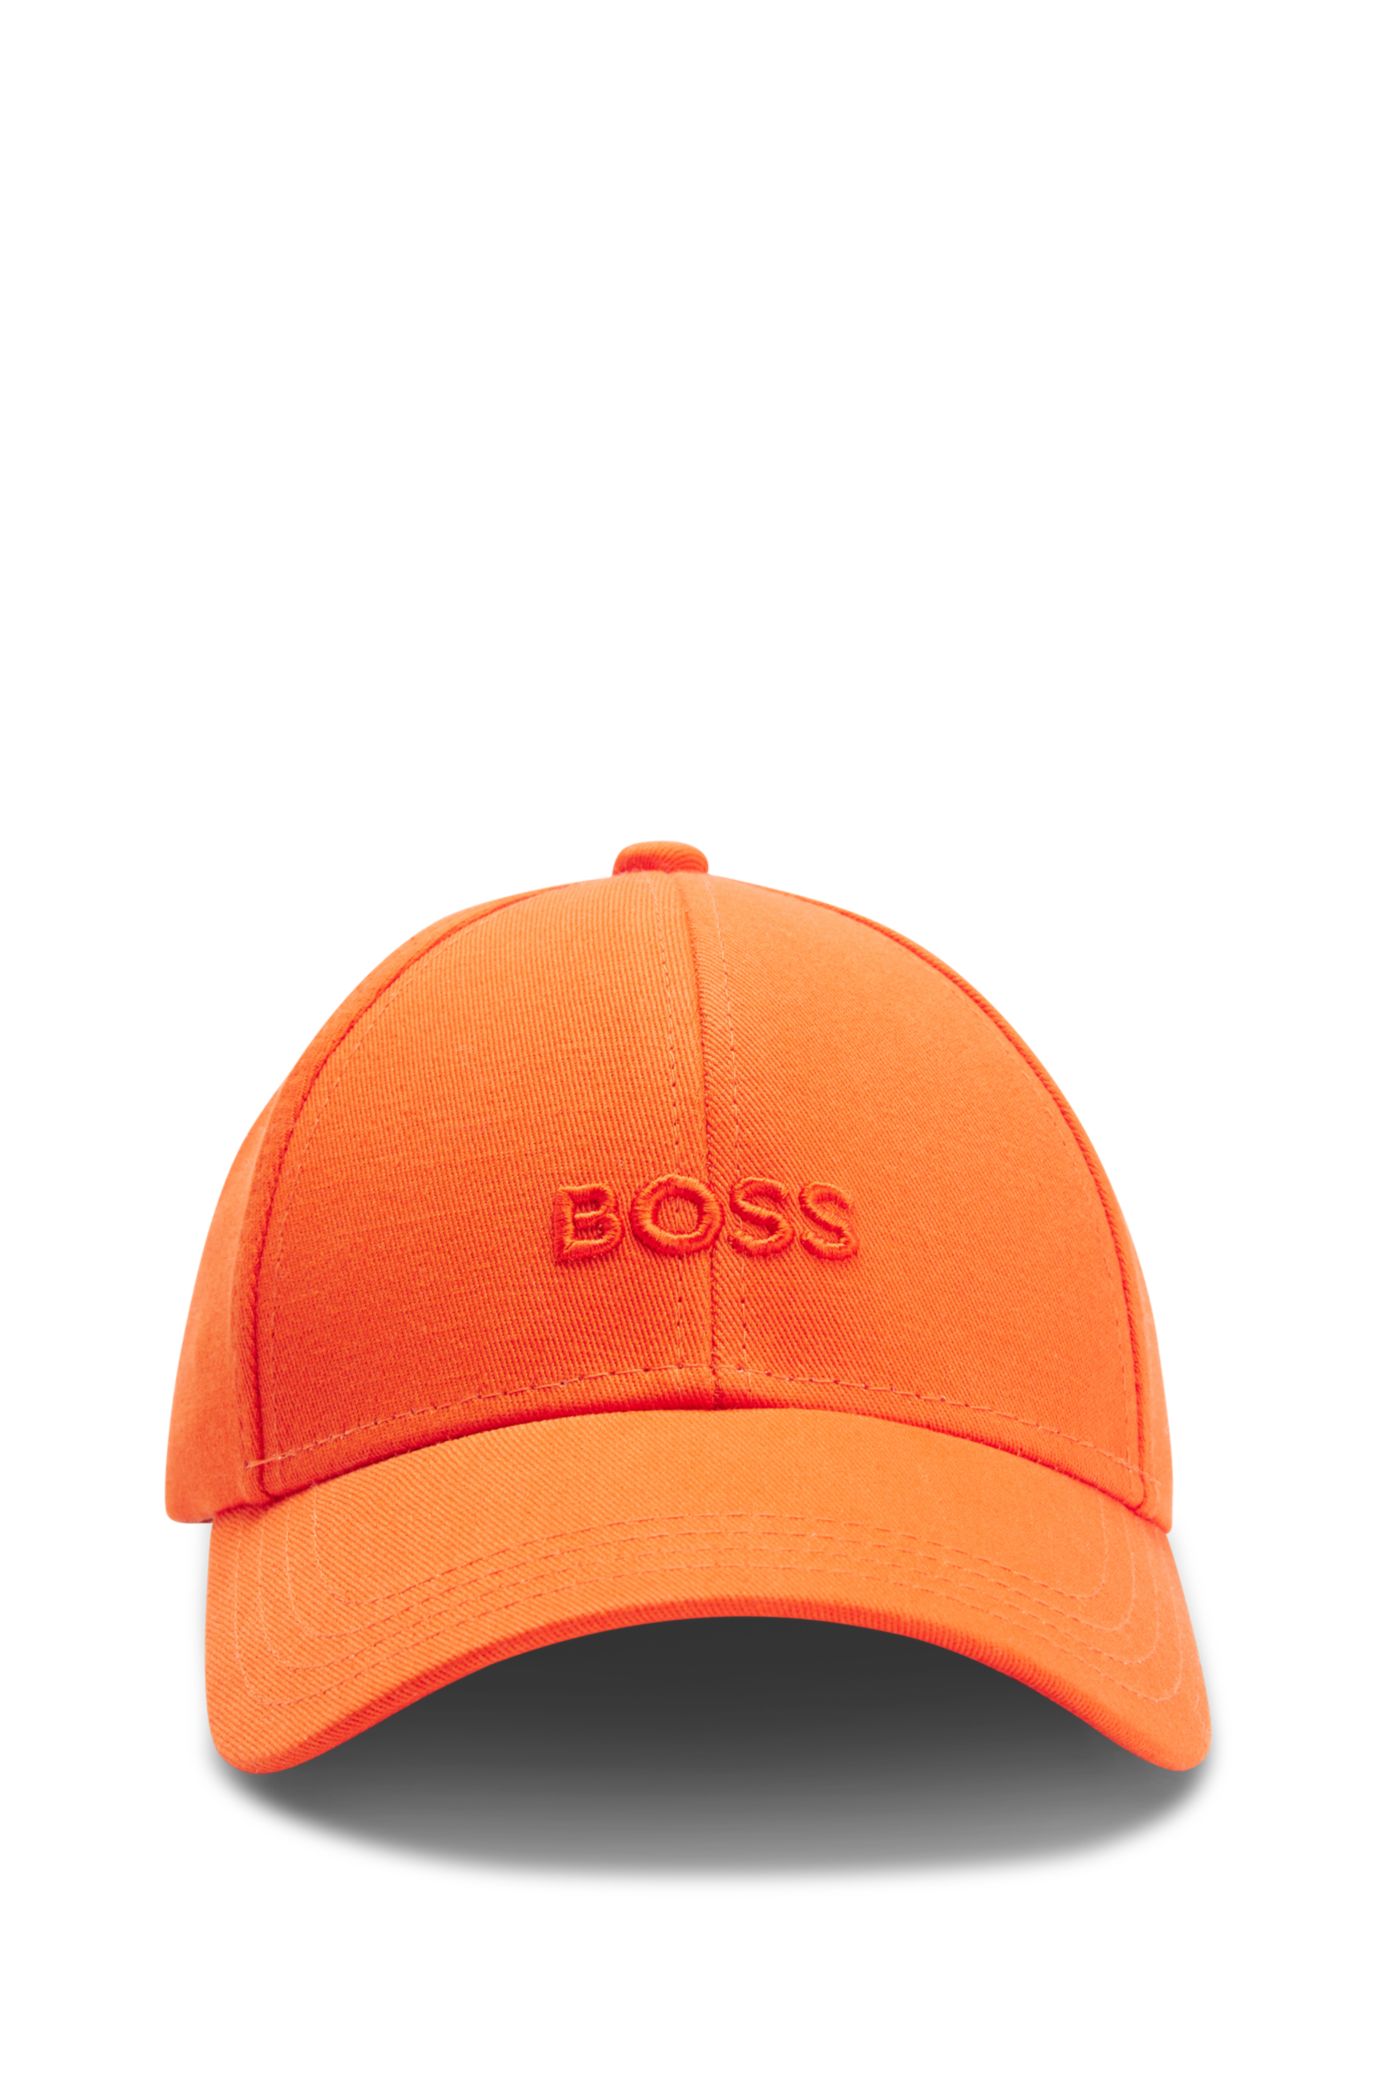 - logo BOSS with Cotton-twill cap embroidered